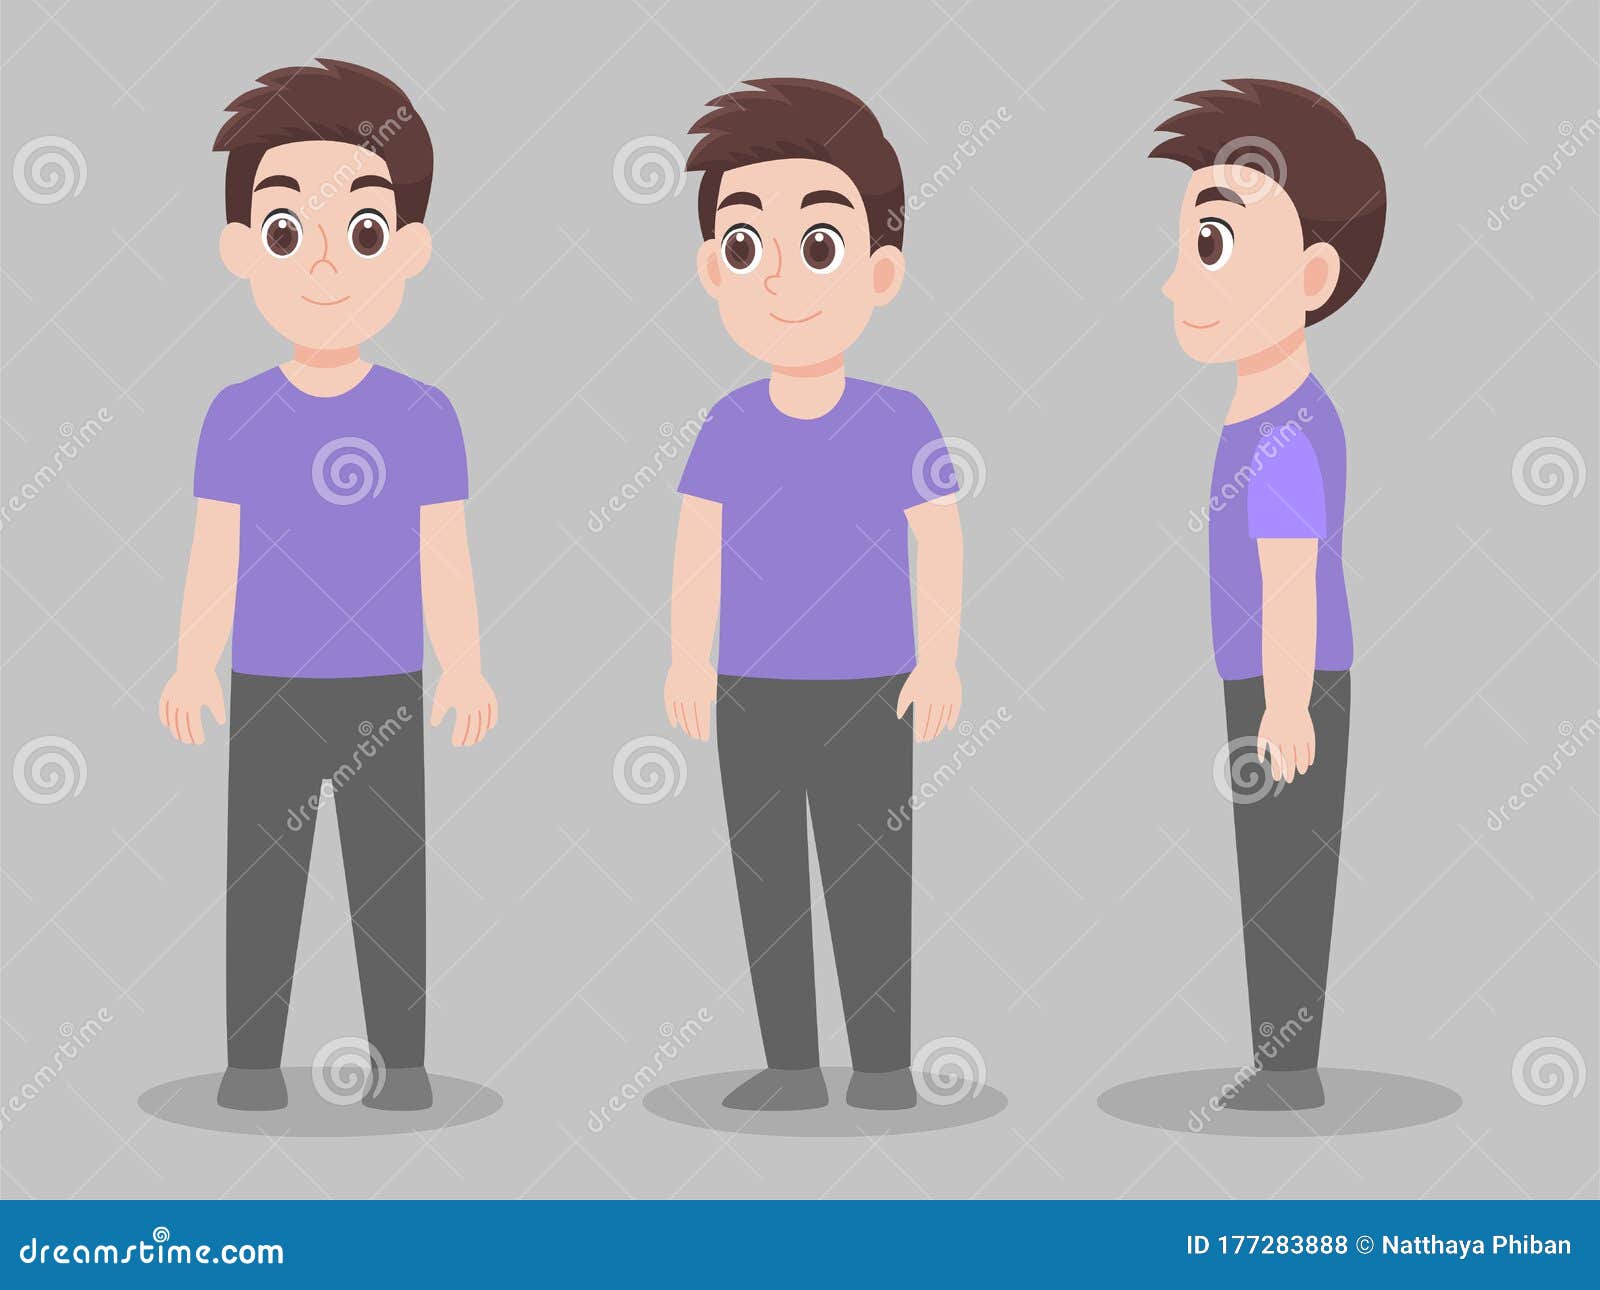 Millie Wass - Portrait character turnaround and Mixed genre clothing designs